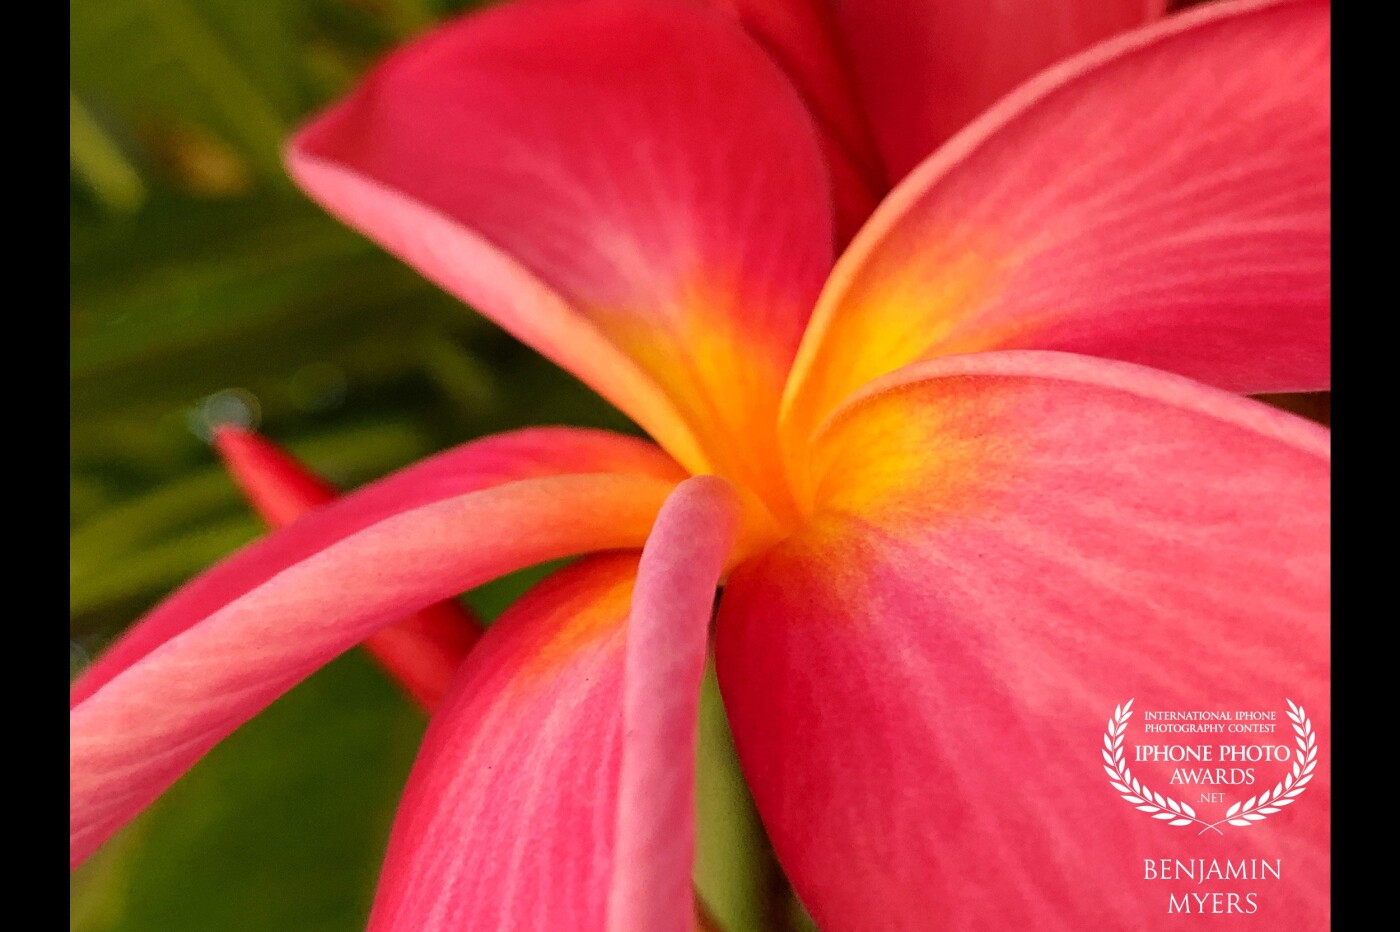 This is my favorite variations of the plumeria flower. I took this macro shot while we were on Lana’i. The island of Lana’i has a rich history and breathtaking beauty. 